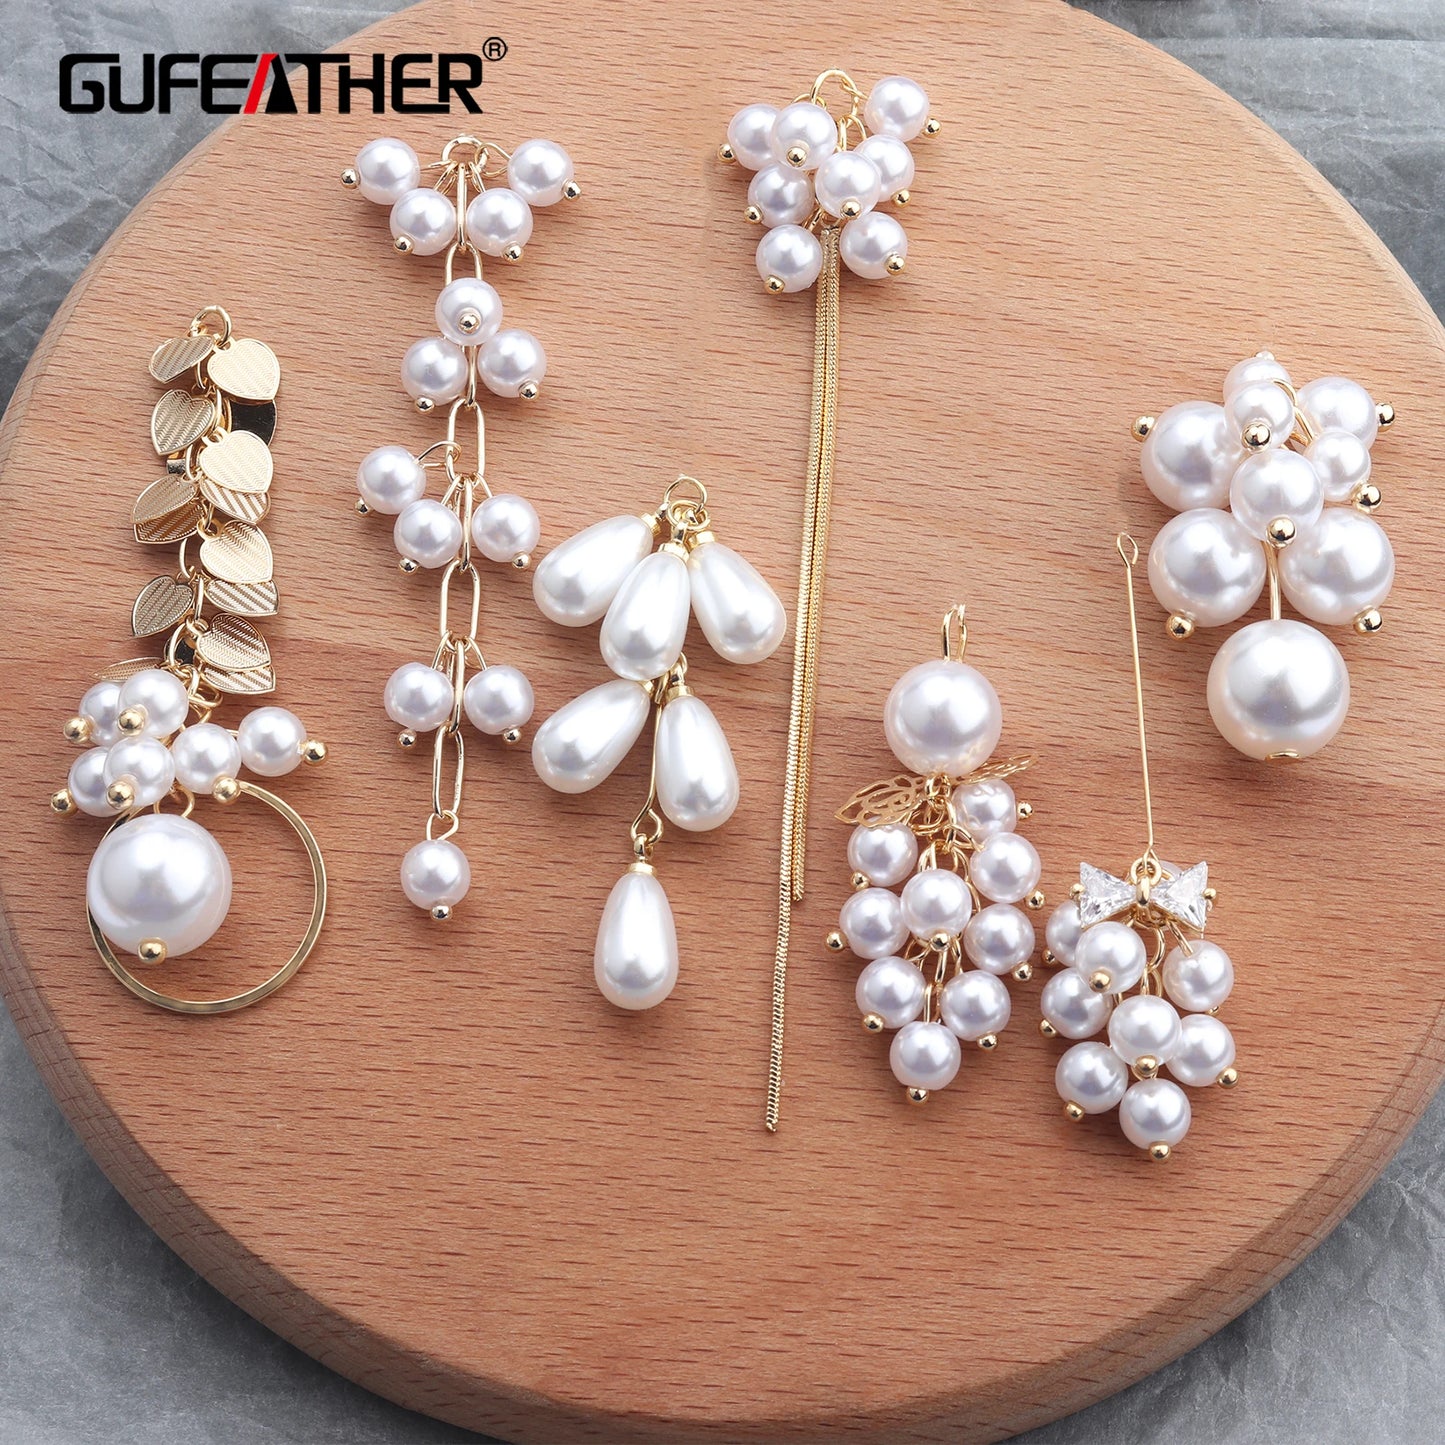 GUFEATHER M640,jewelry making,14k gold plated,ear chain,diy beads pendant,copper,pass REACH,nickel free,diy earrings,6pcs/lot